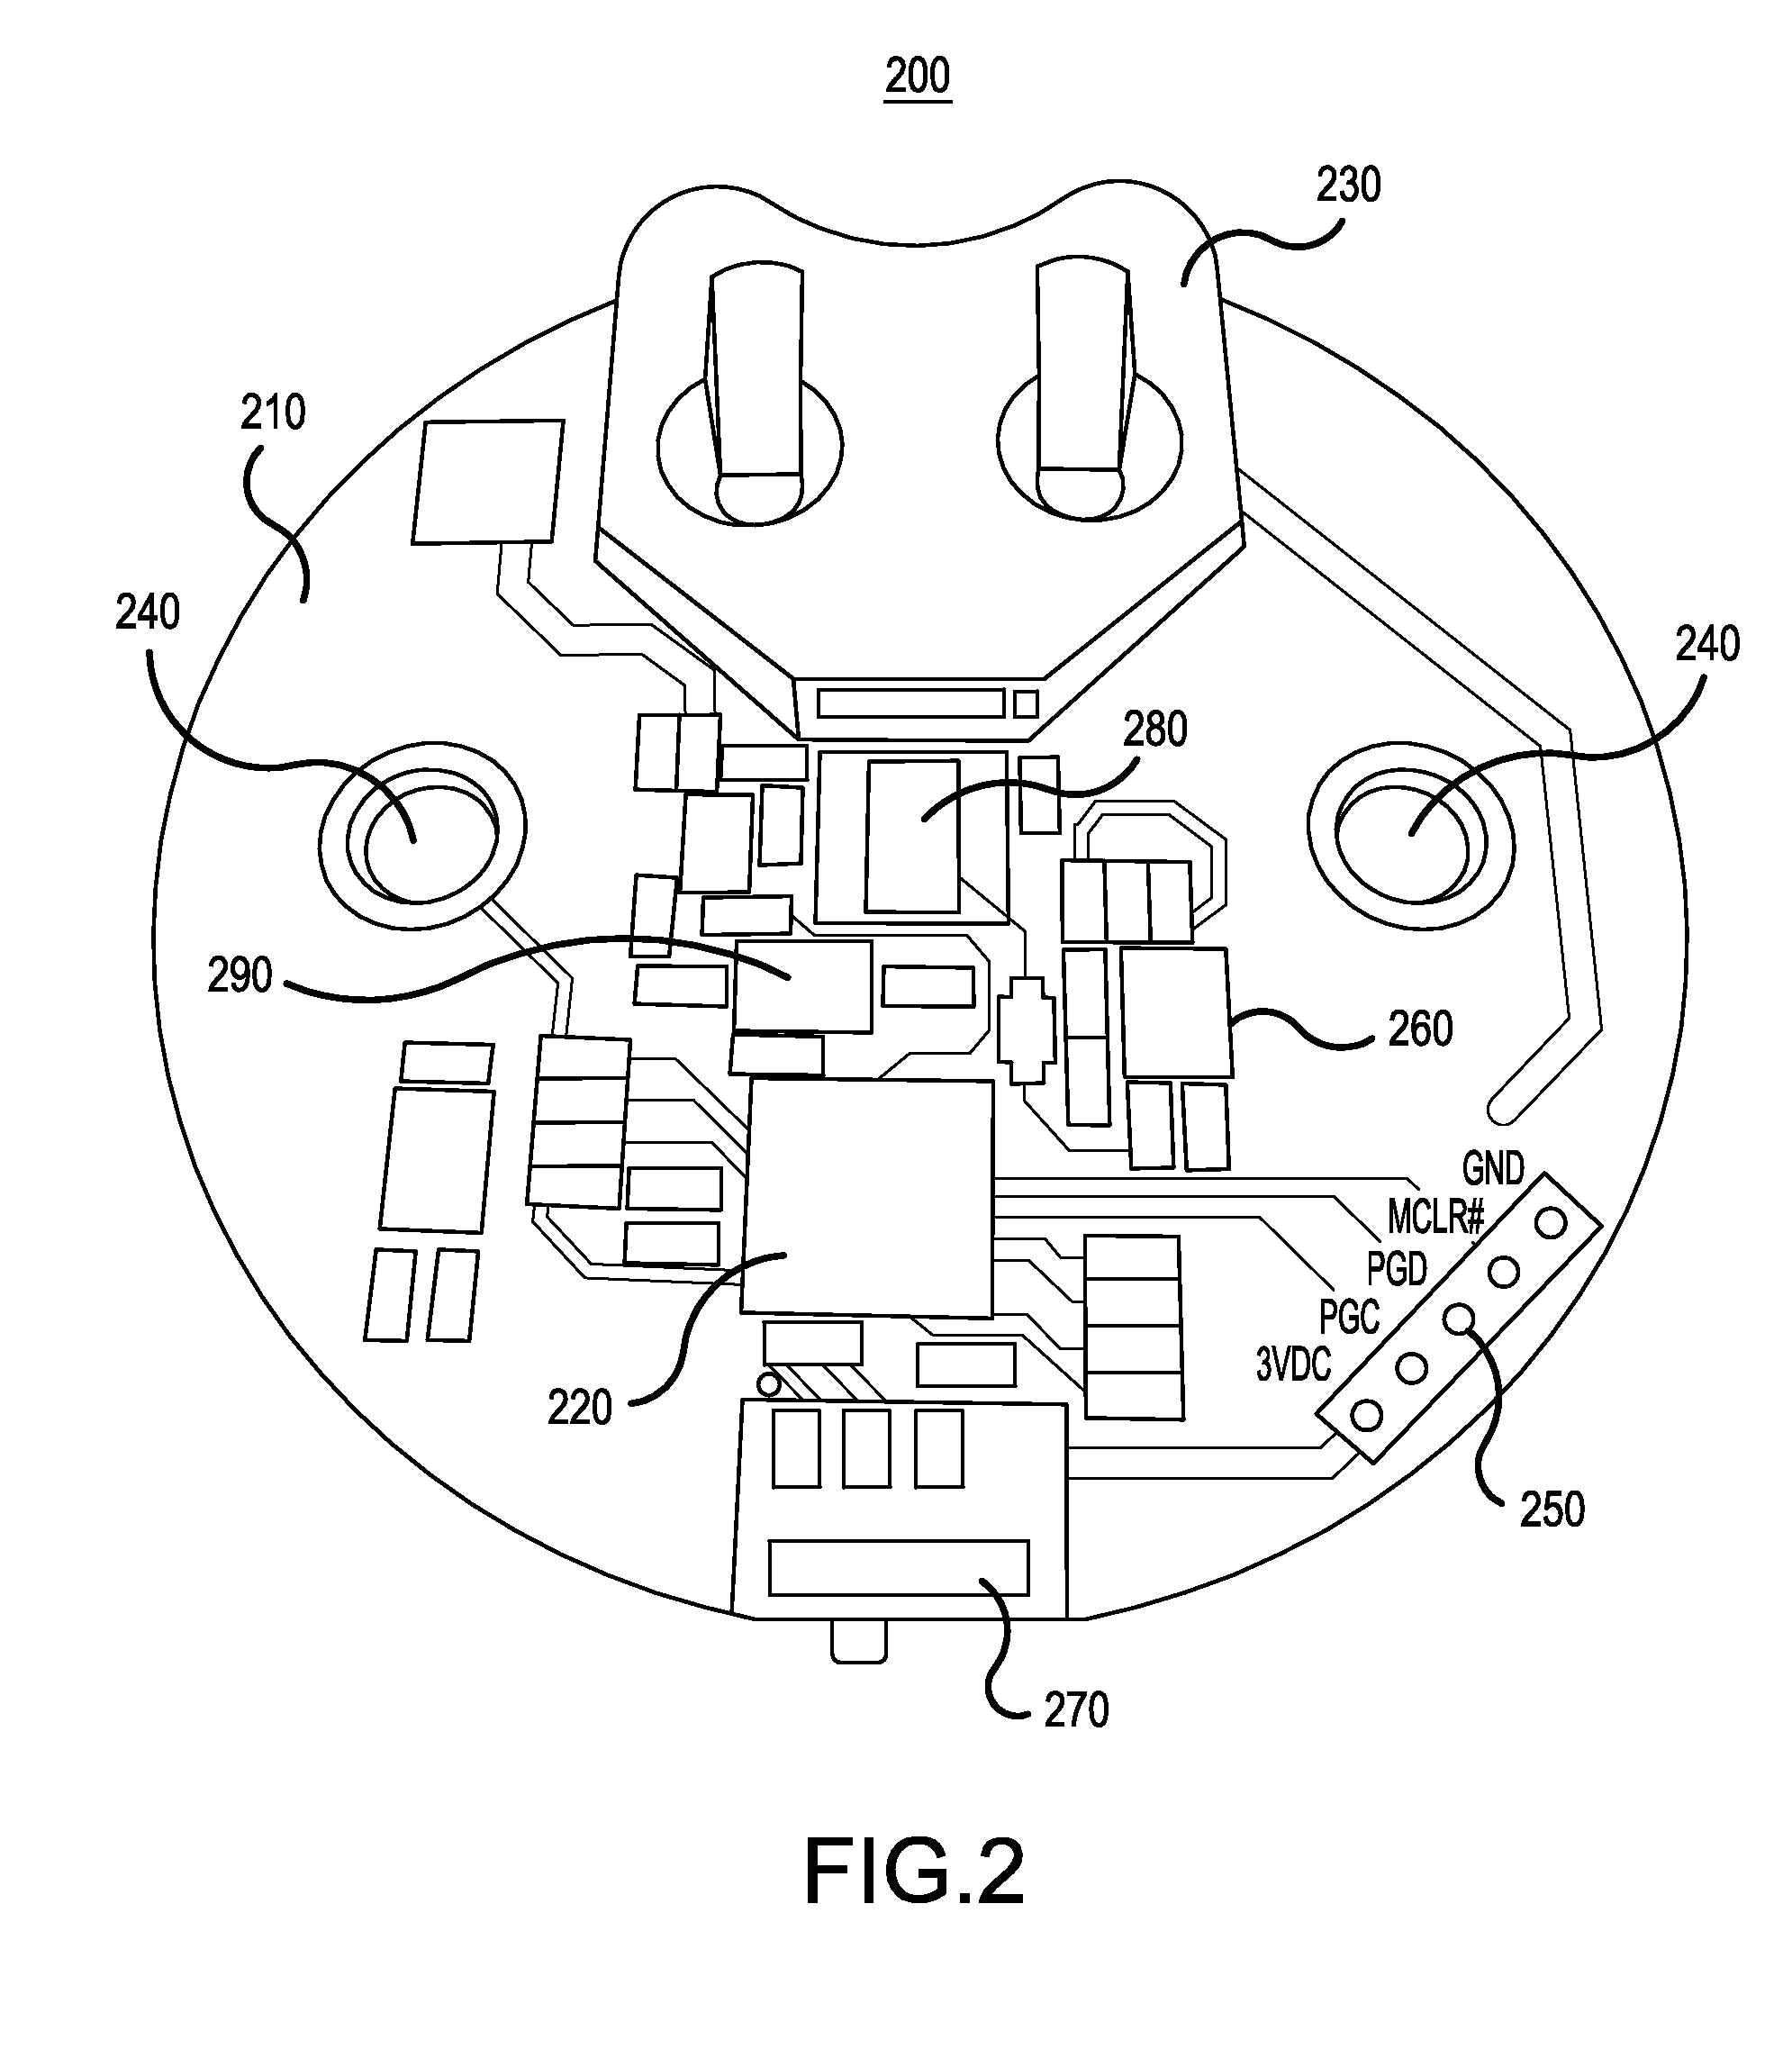 Electro-stimulation device and method of systematically compounded modulation of current intensity with other output parameters for affecting biological tissues